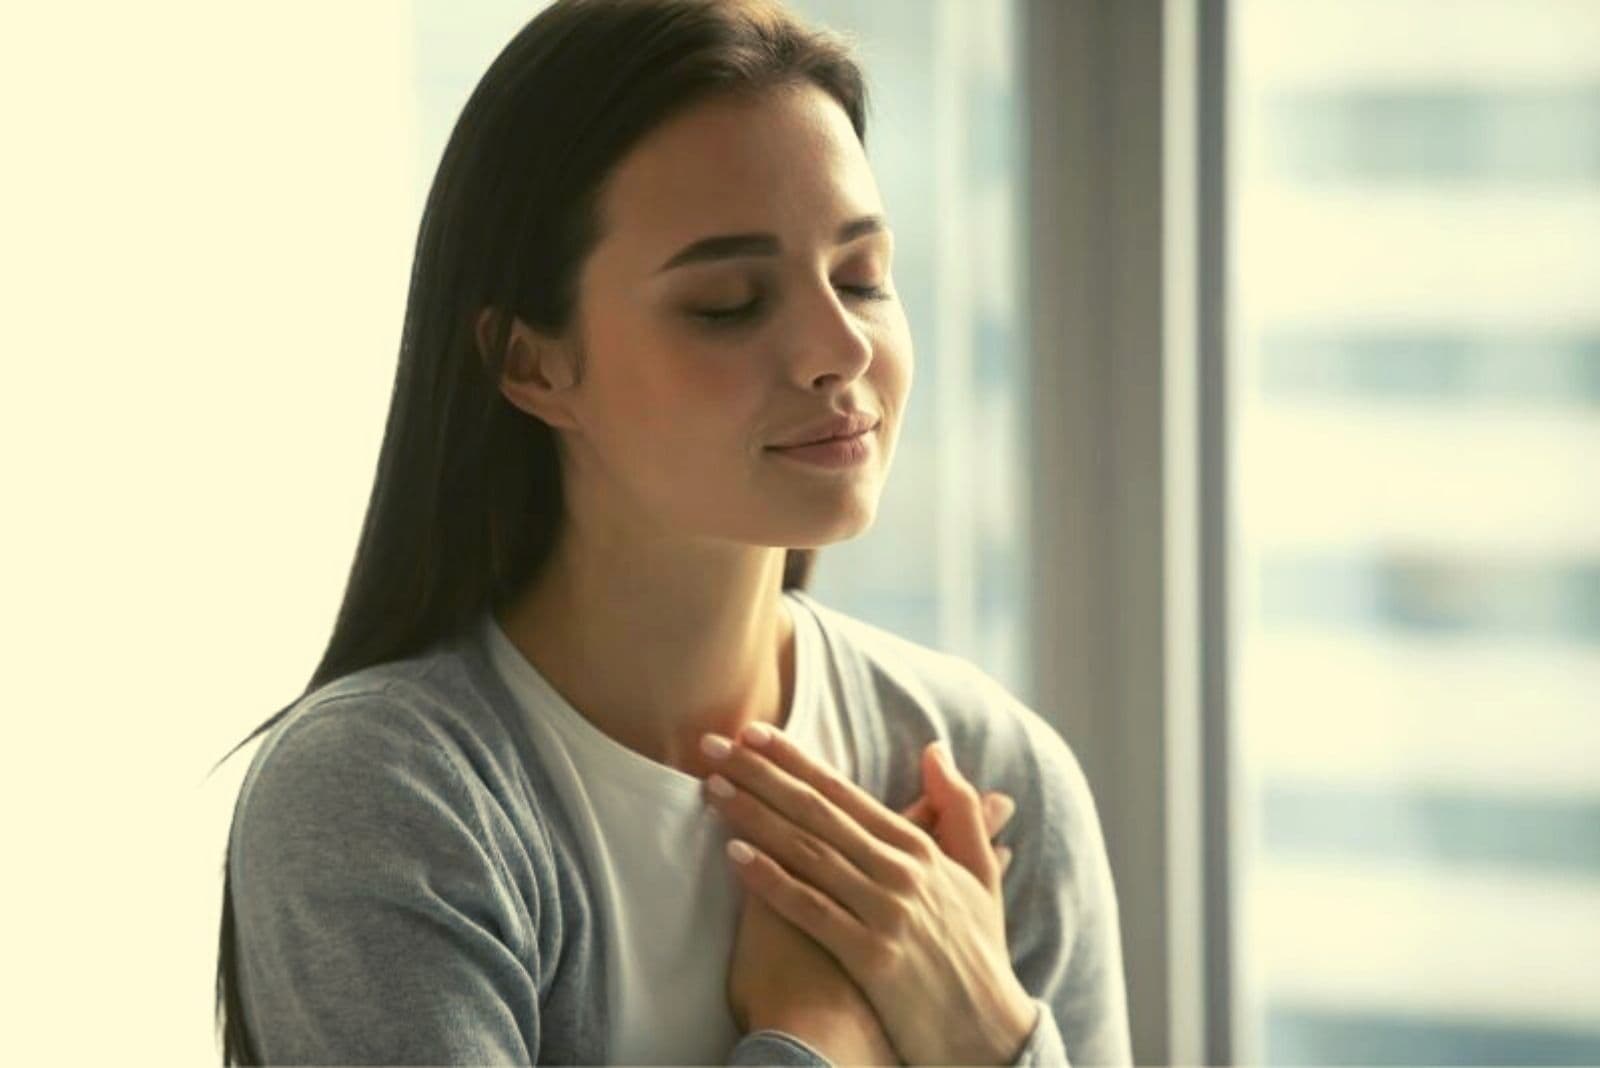 woman putting her hands close to her heart and closing her eyes